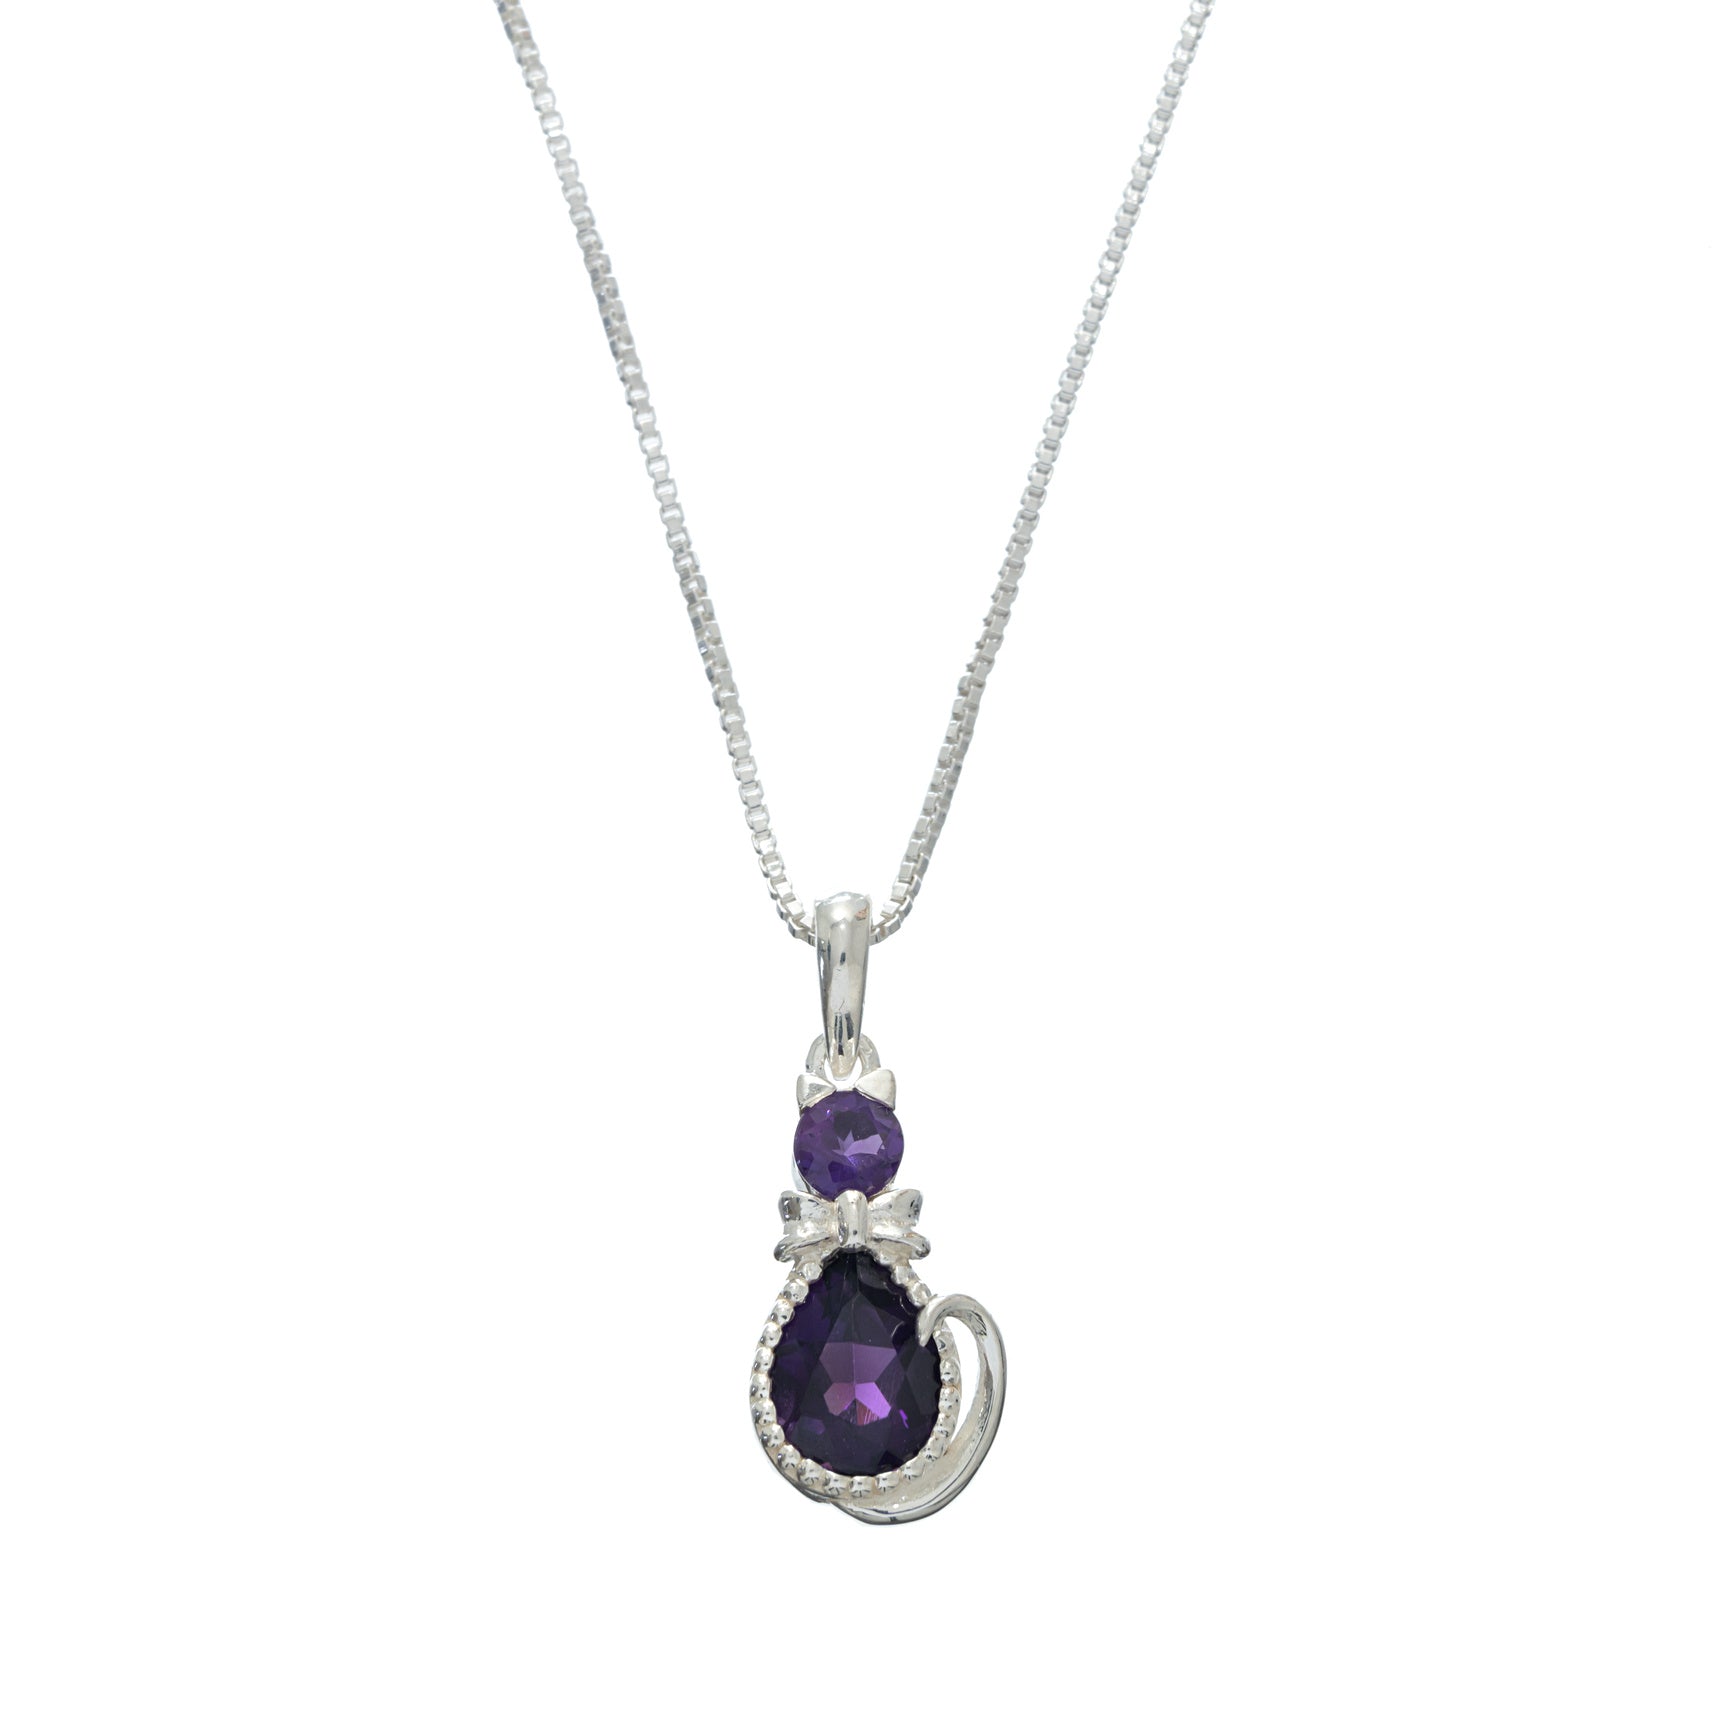 Kitty Cat Sterling and Four Peaks Amethyst Pendant